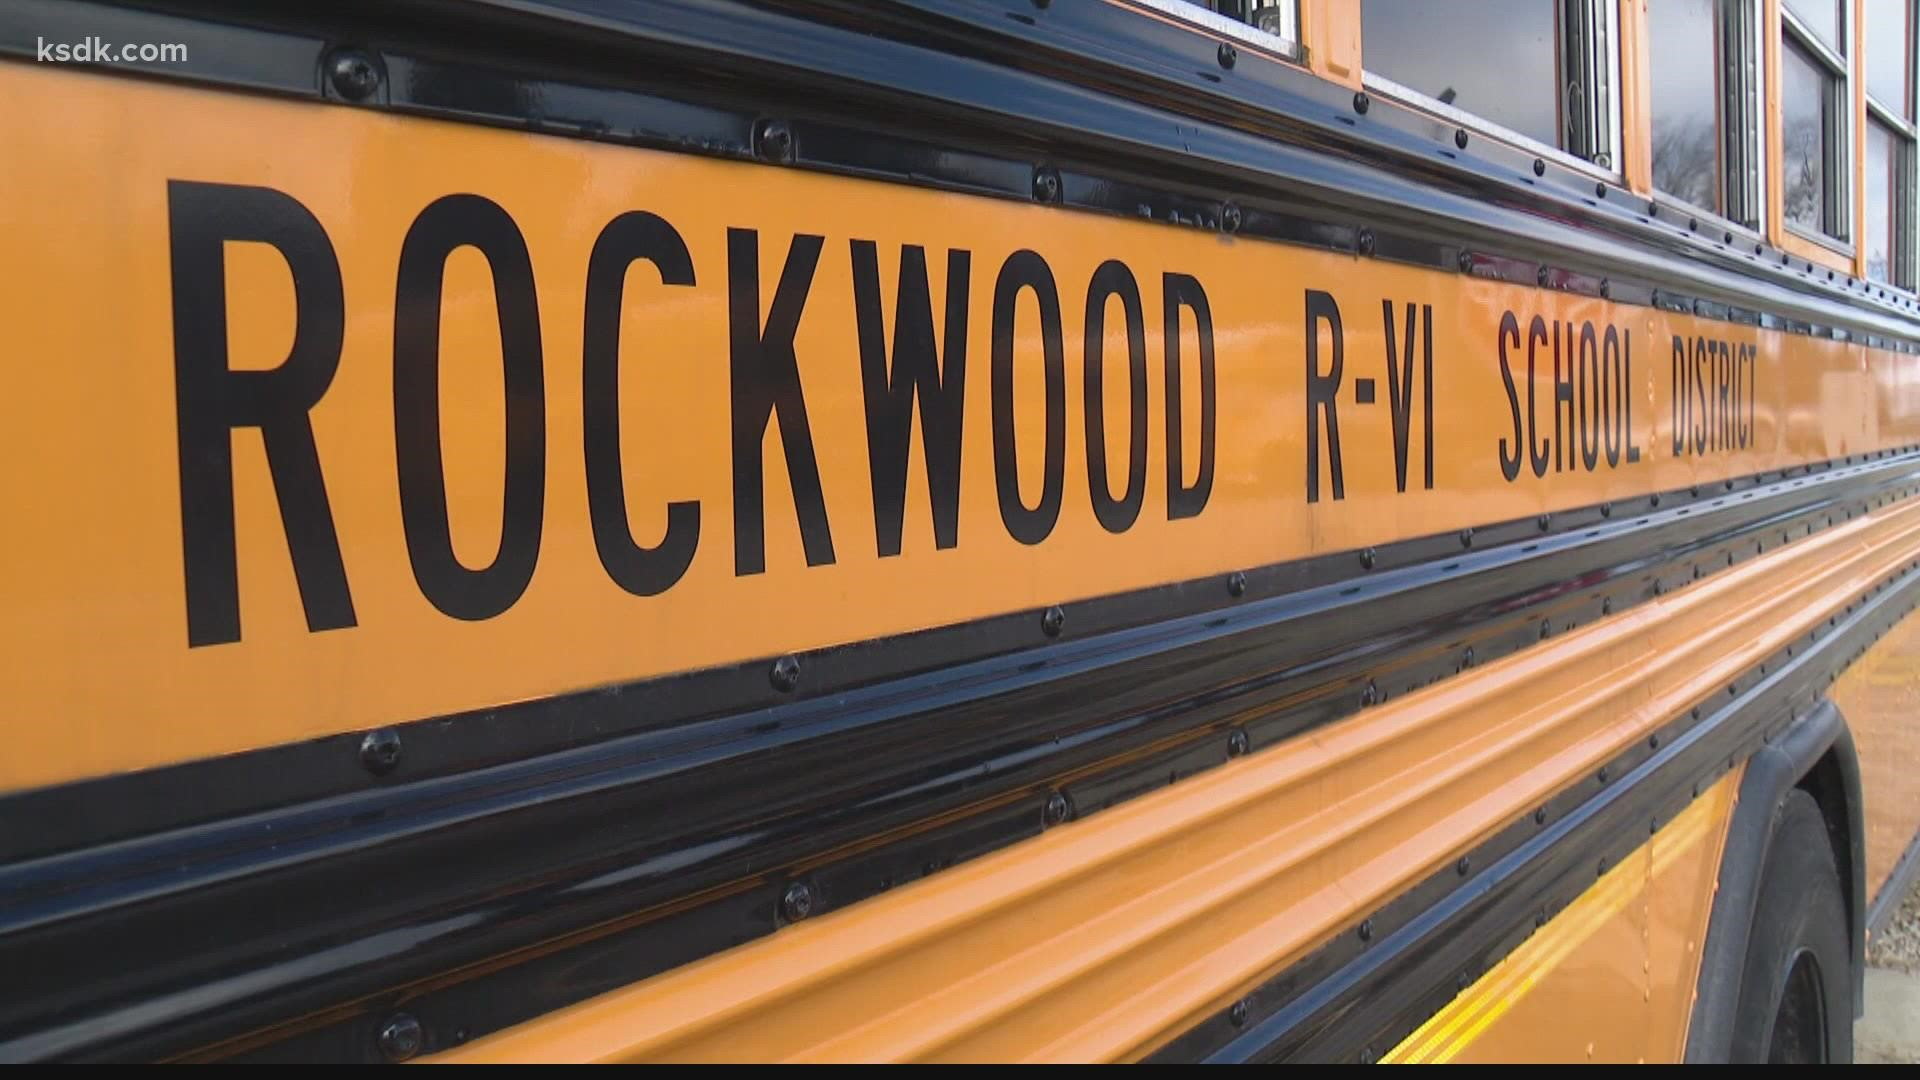 Rockwood Schools utilizes their unleaded buses for long trips. Other districts are moving to 4-day weeks or adjusting bus stops for more efficient routes.